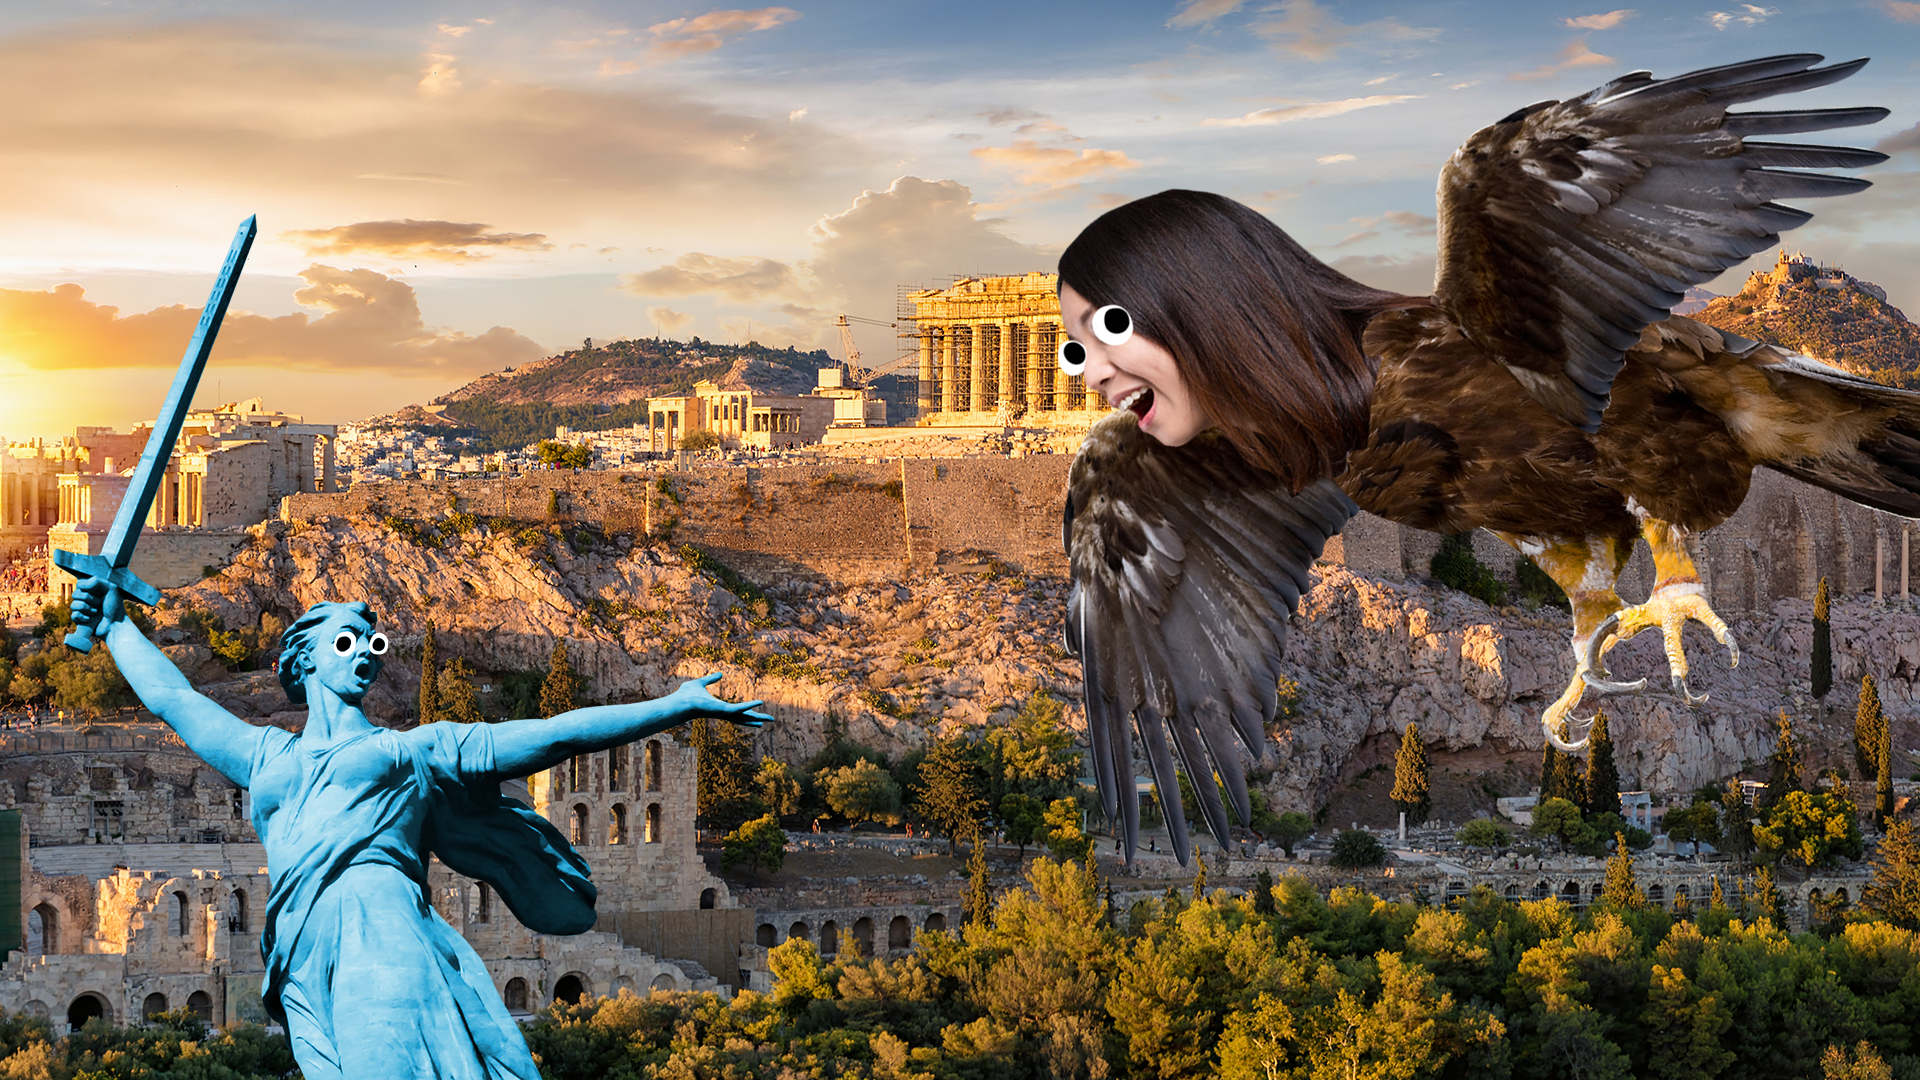 Beano Harpy and statue in ancient city